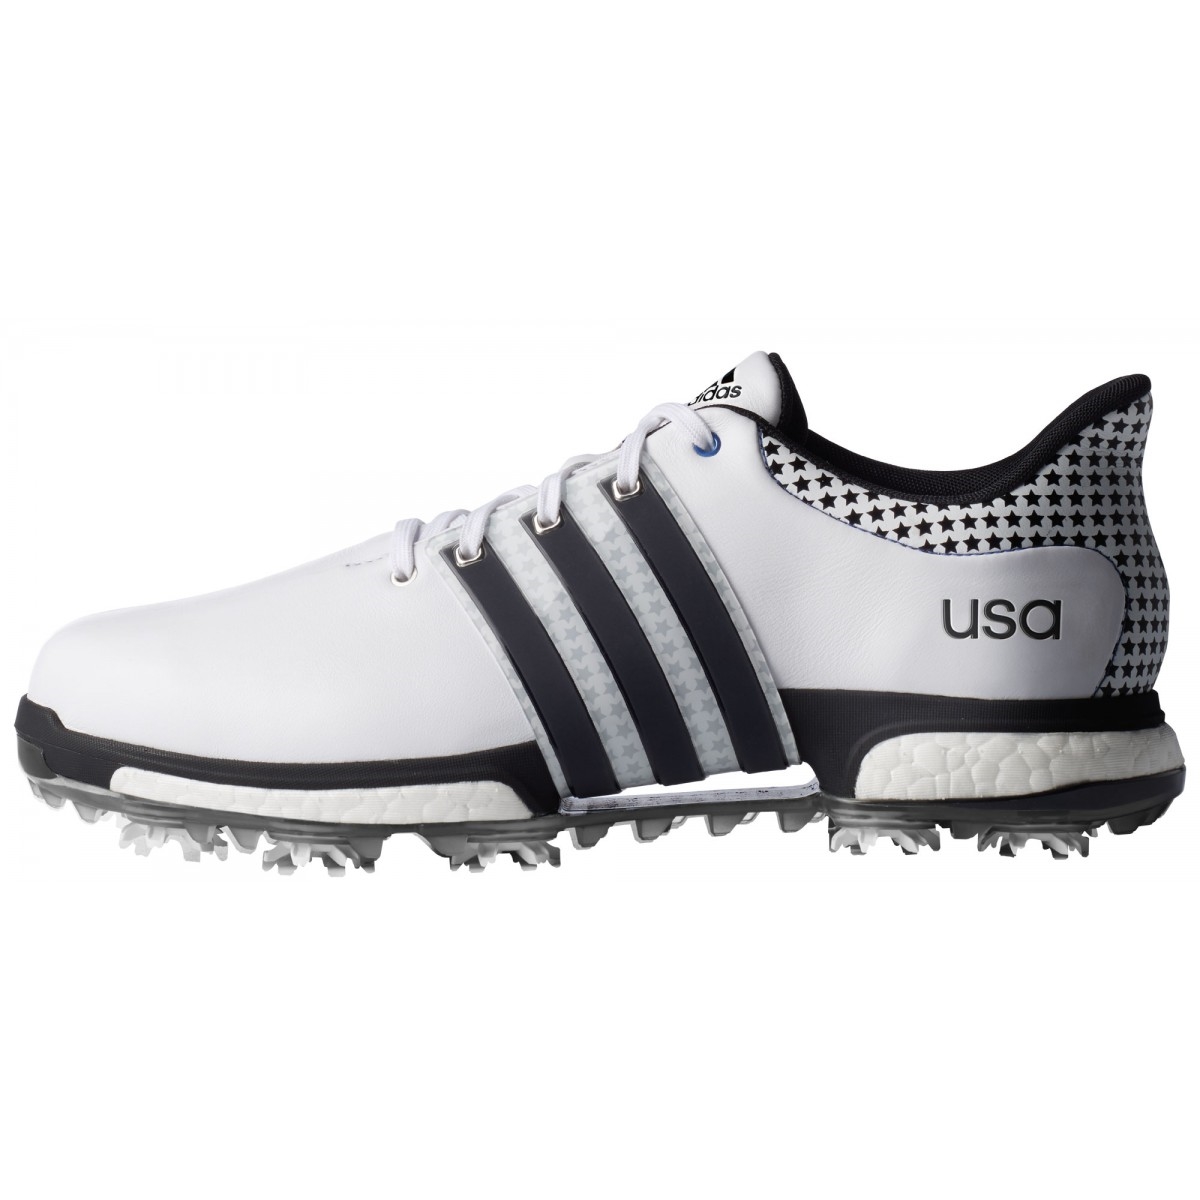 Tour Boost Limited Ryder Cup White/Black/Grey